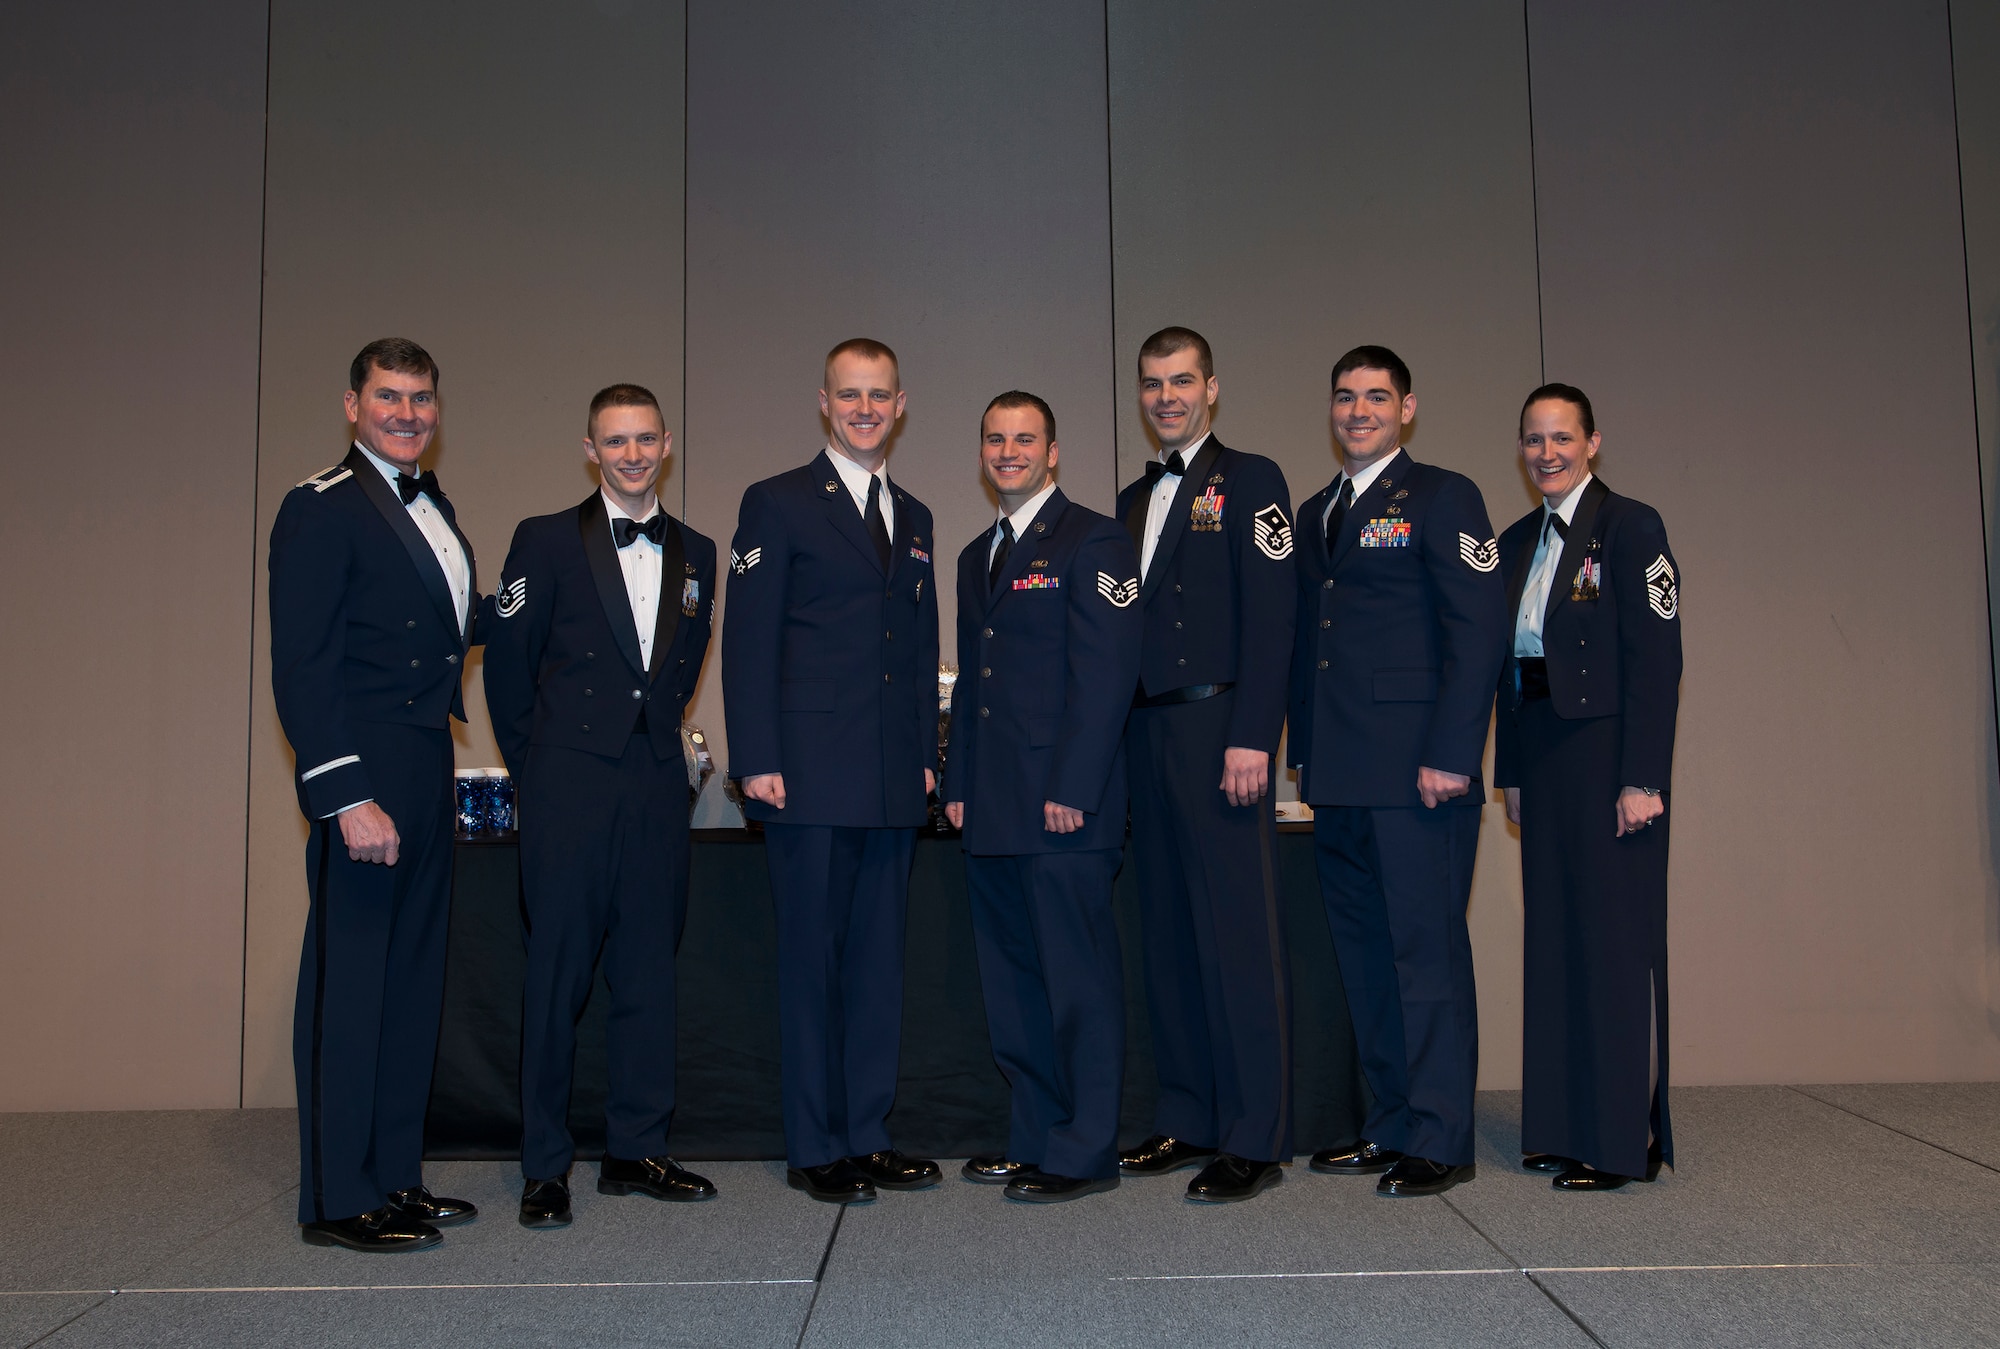 The winners of the Washington Air National Guard Annual Awards pose for a picture at the Spokane Convention Center, Spokane, Wash., Feb.8, 2014.  Pictured from L to R are Col. John S. Tuohy, Assistant Adjutant General - Air, Washington, Tech. Sgt. Christopher Marrazzo, 141st Operations Support Squadron, Senior Airman Jesse Clifford, Western Area Defense Sector, Staff Sgt. Nathan Lucas, Western Area Defense Sector, Master Sgt. John Lawton, 111th Air Support Operations Squadron, Tech. Sgt Cory Welton, 111th Air Support Operations Squadron and Chief Master Sgt. Trisha Almond, command chief Wash. Air National Guard. (U.S. Air National Guard photo by Tech. Sgt. Michael L. Brown/Released)